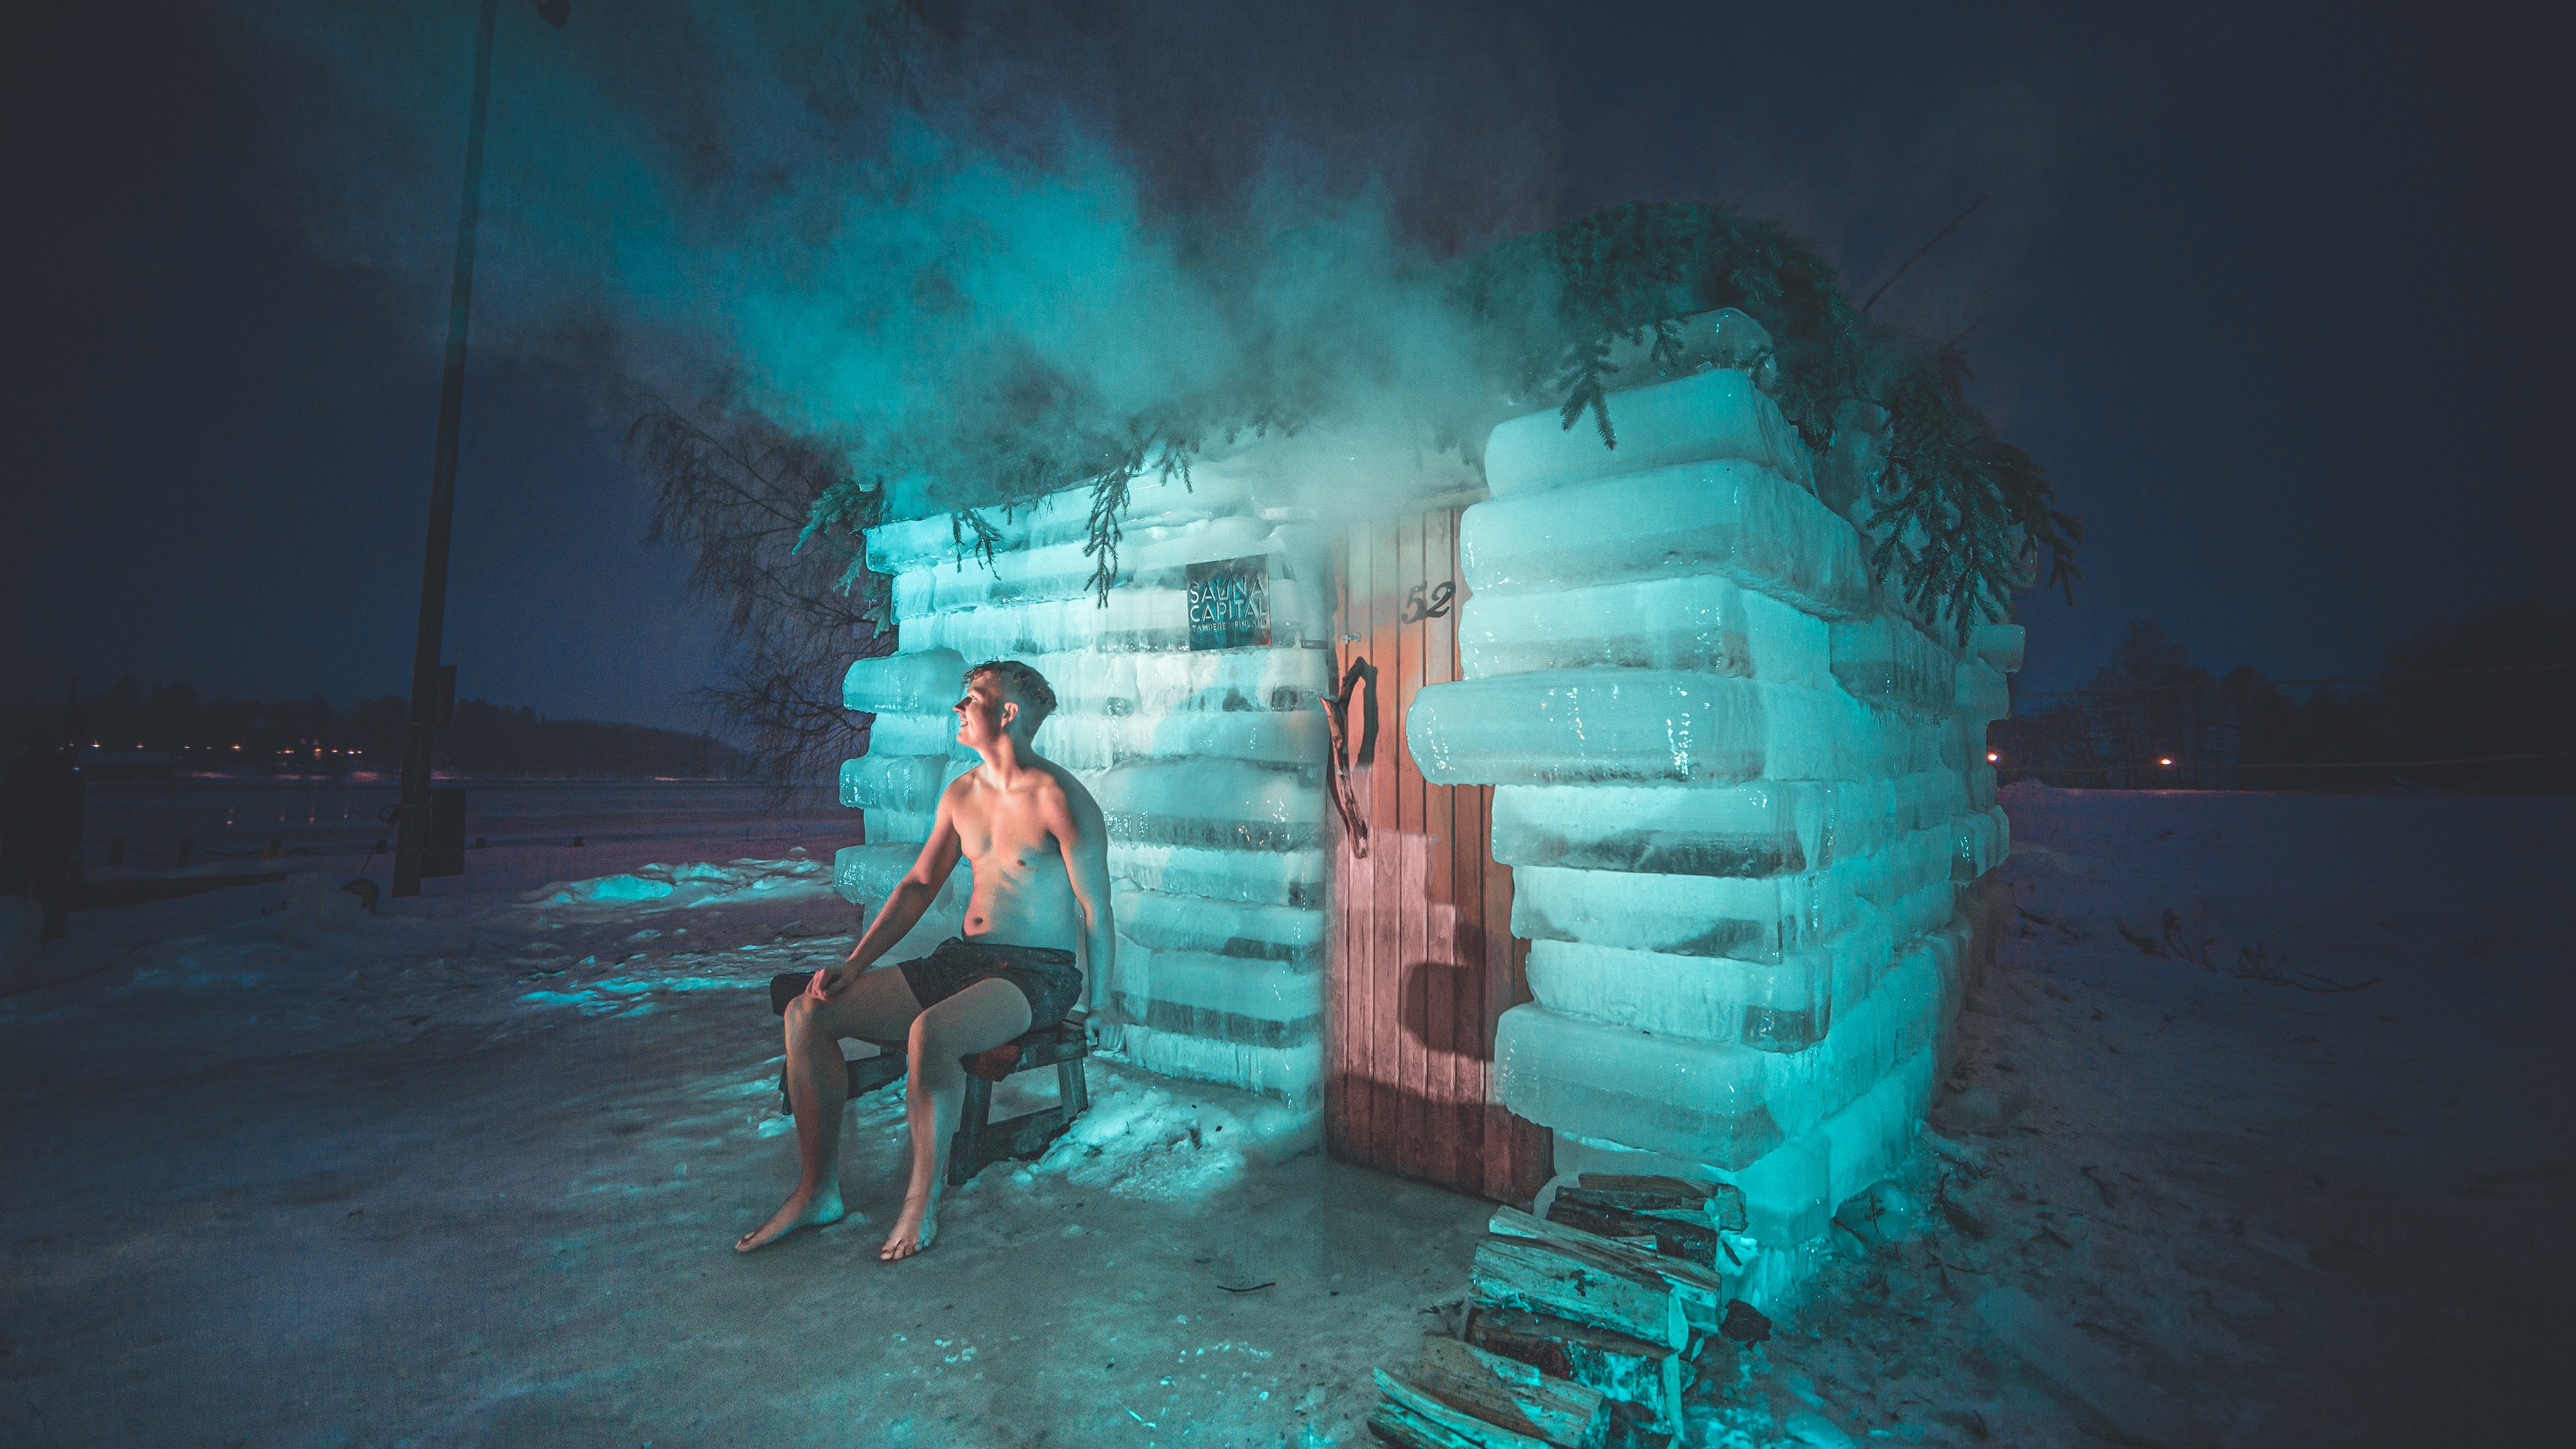 A shirtless man sits on a wooden chair outside a steaming sauna made of ice at nighttime.